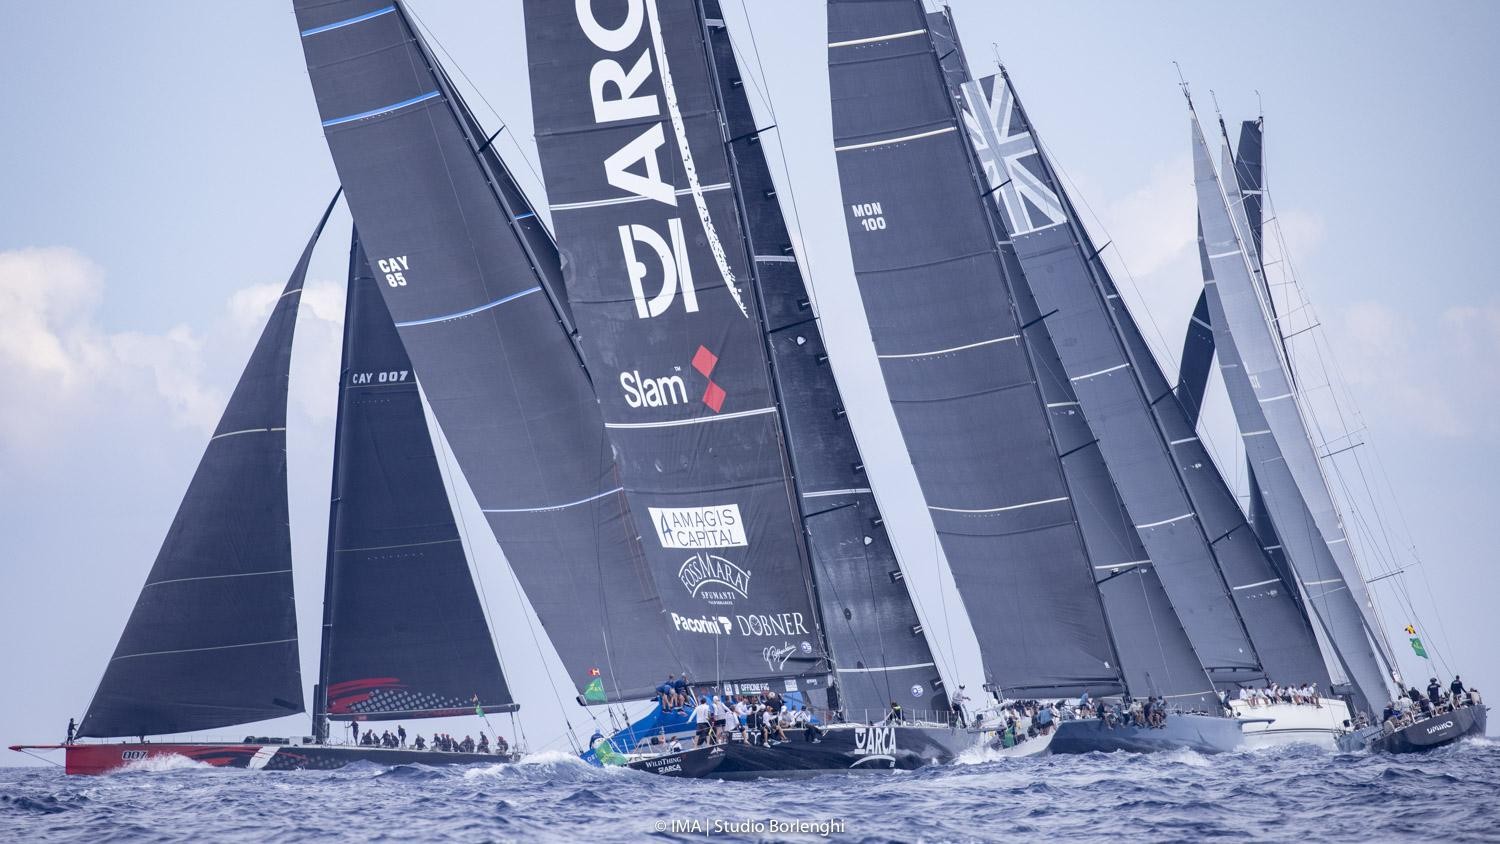 Comanche's bails from the Maxi class start, unable to make the pin with Rambler 88. Photo: IMA / Studio Borlenghi